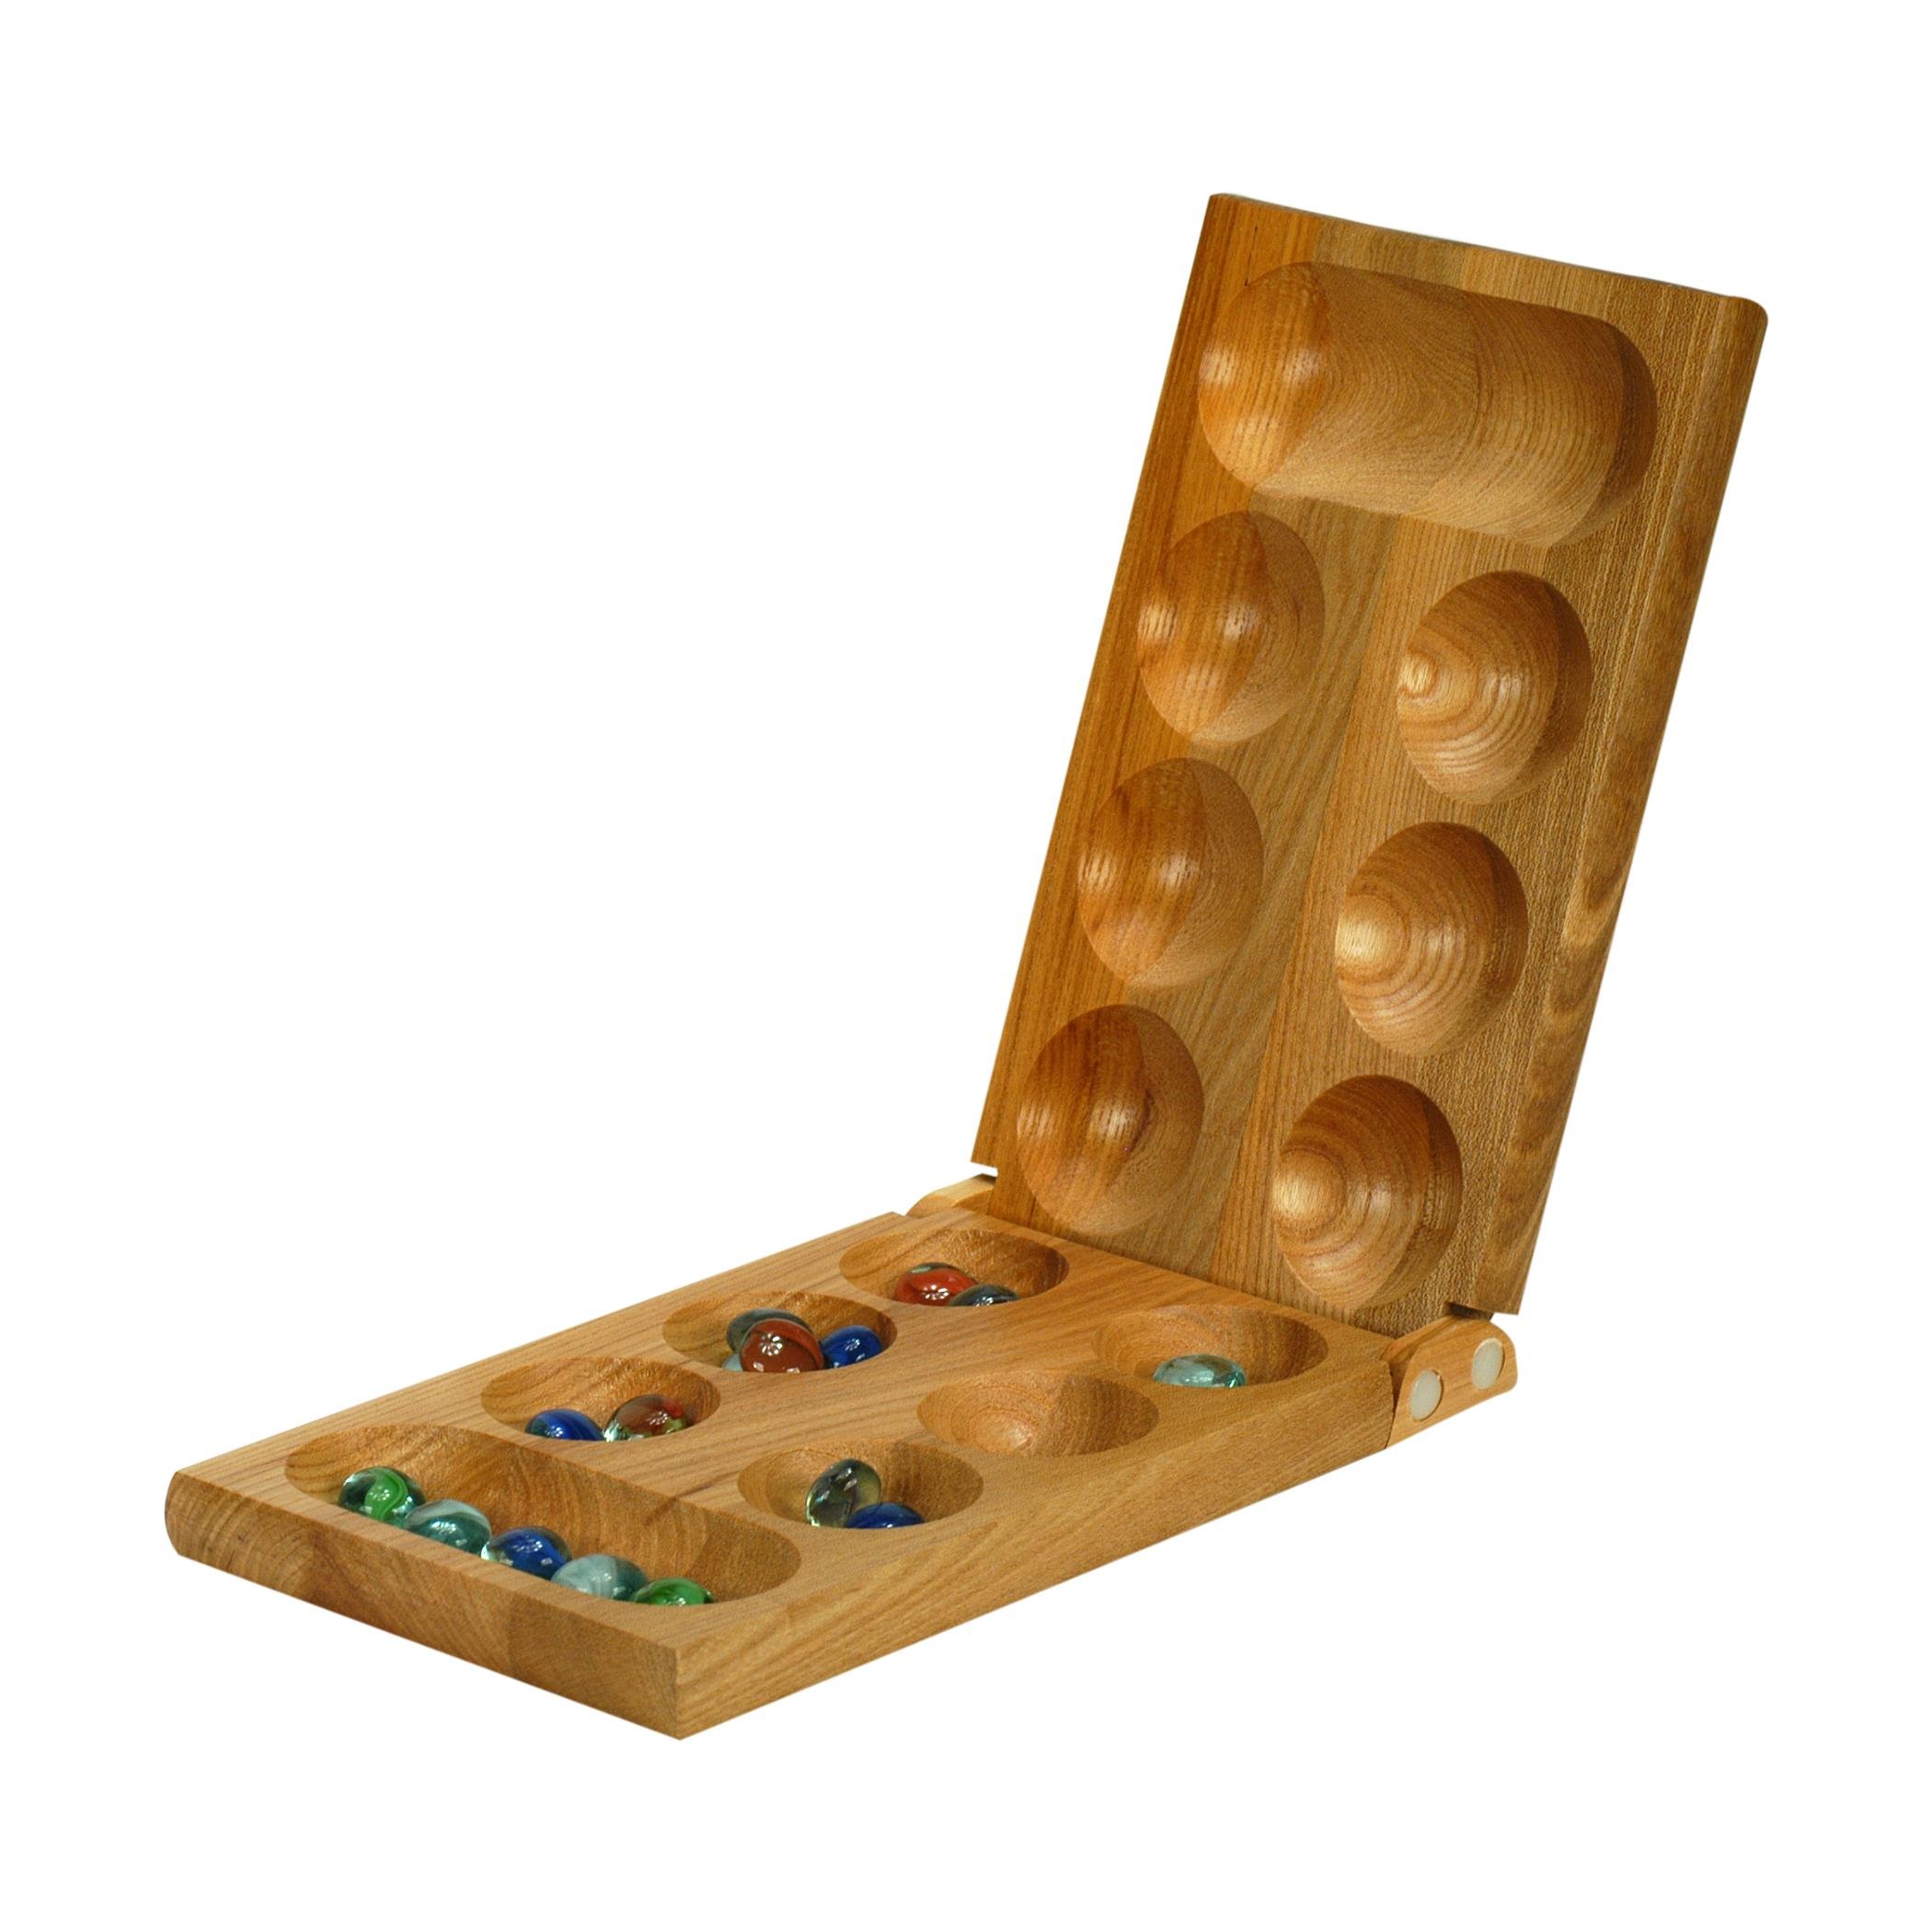  Mancala With Folding Wooden Board Game